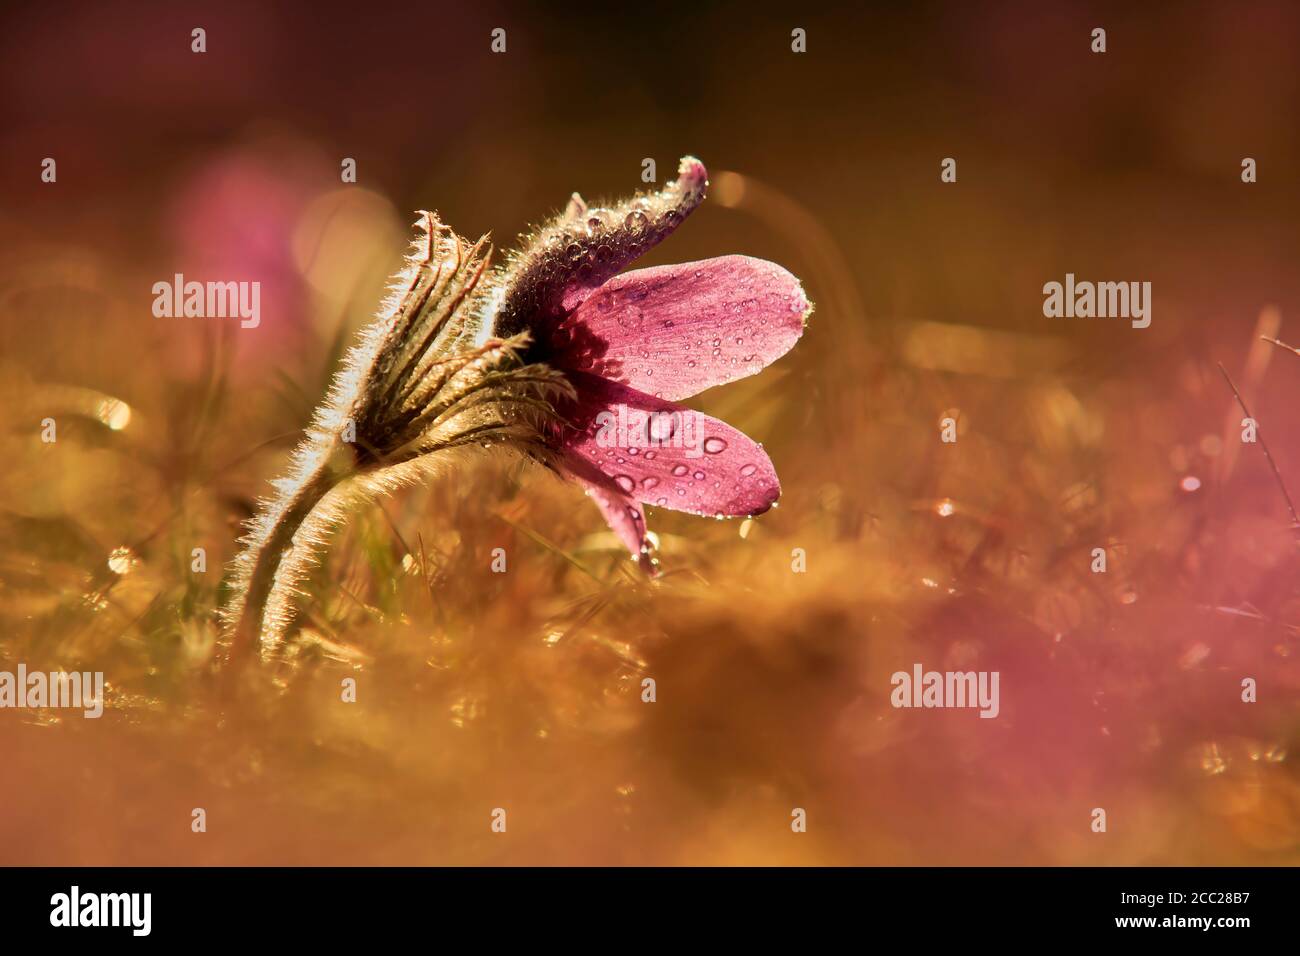 Germany, Baden Wuerttemberg, Pasque flower at dusk, close up Stock Photo